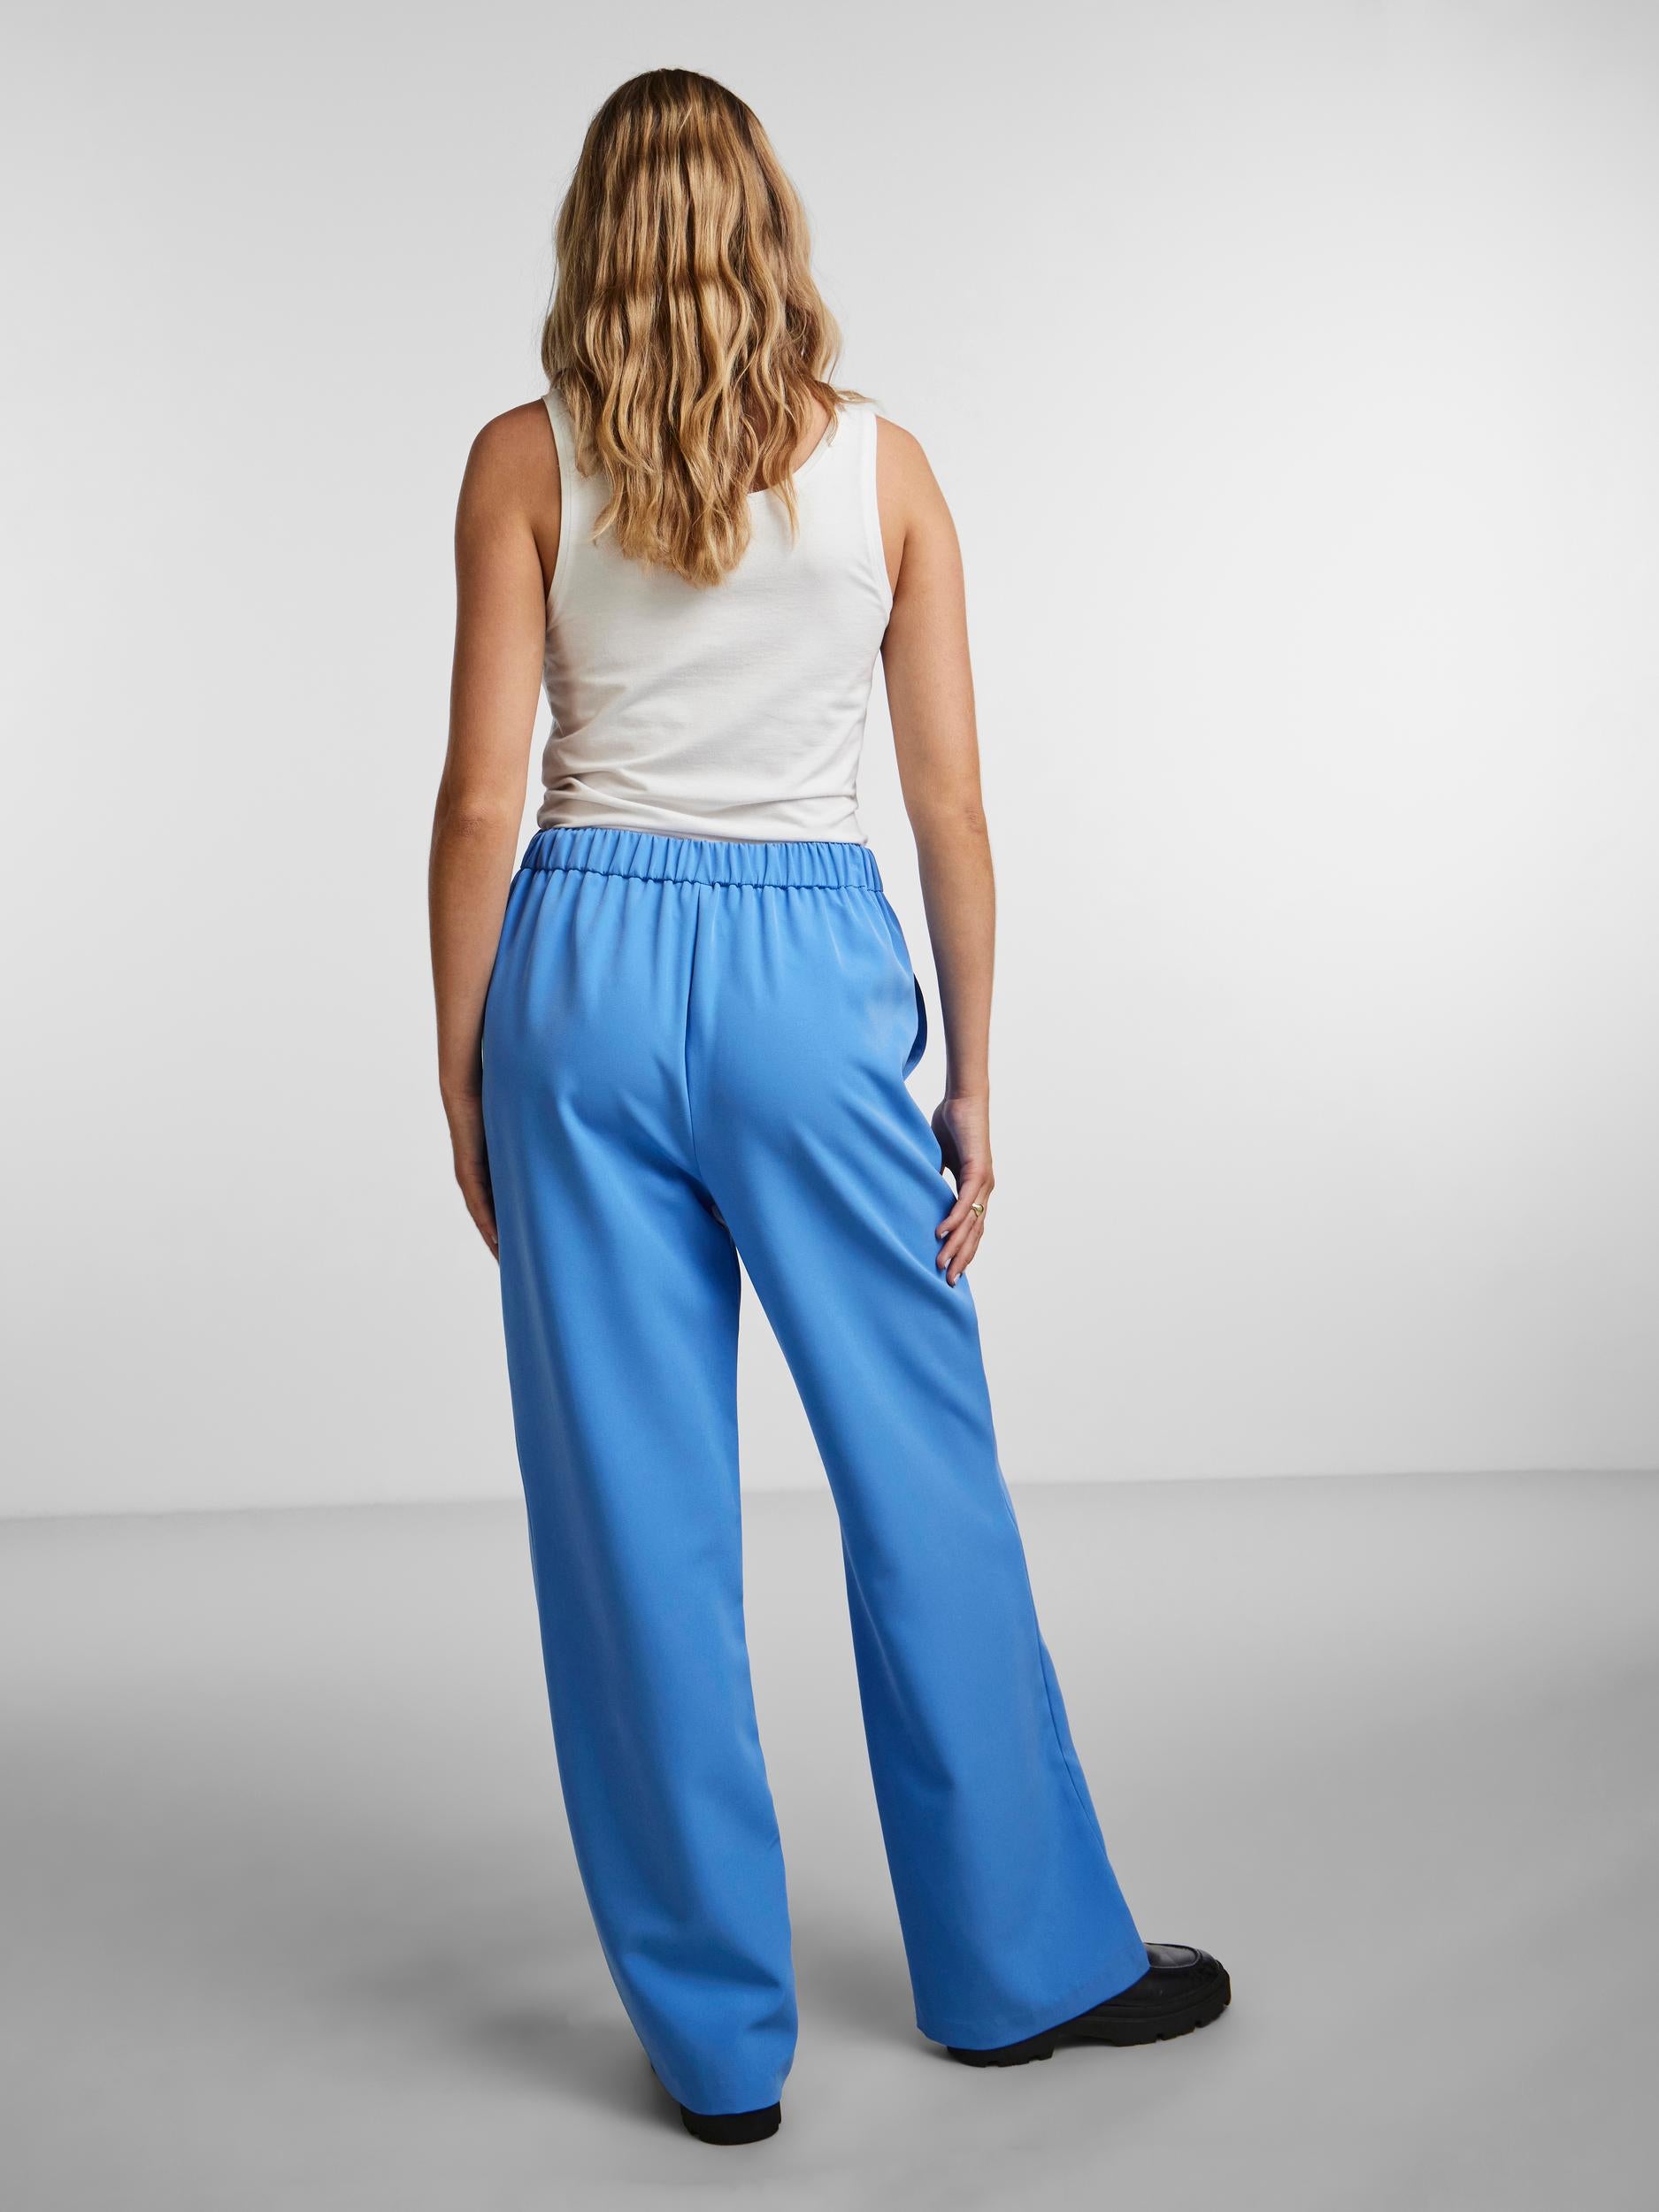 Pieces Bossy wide pants - marina